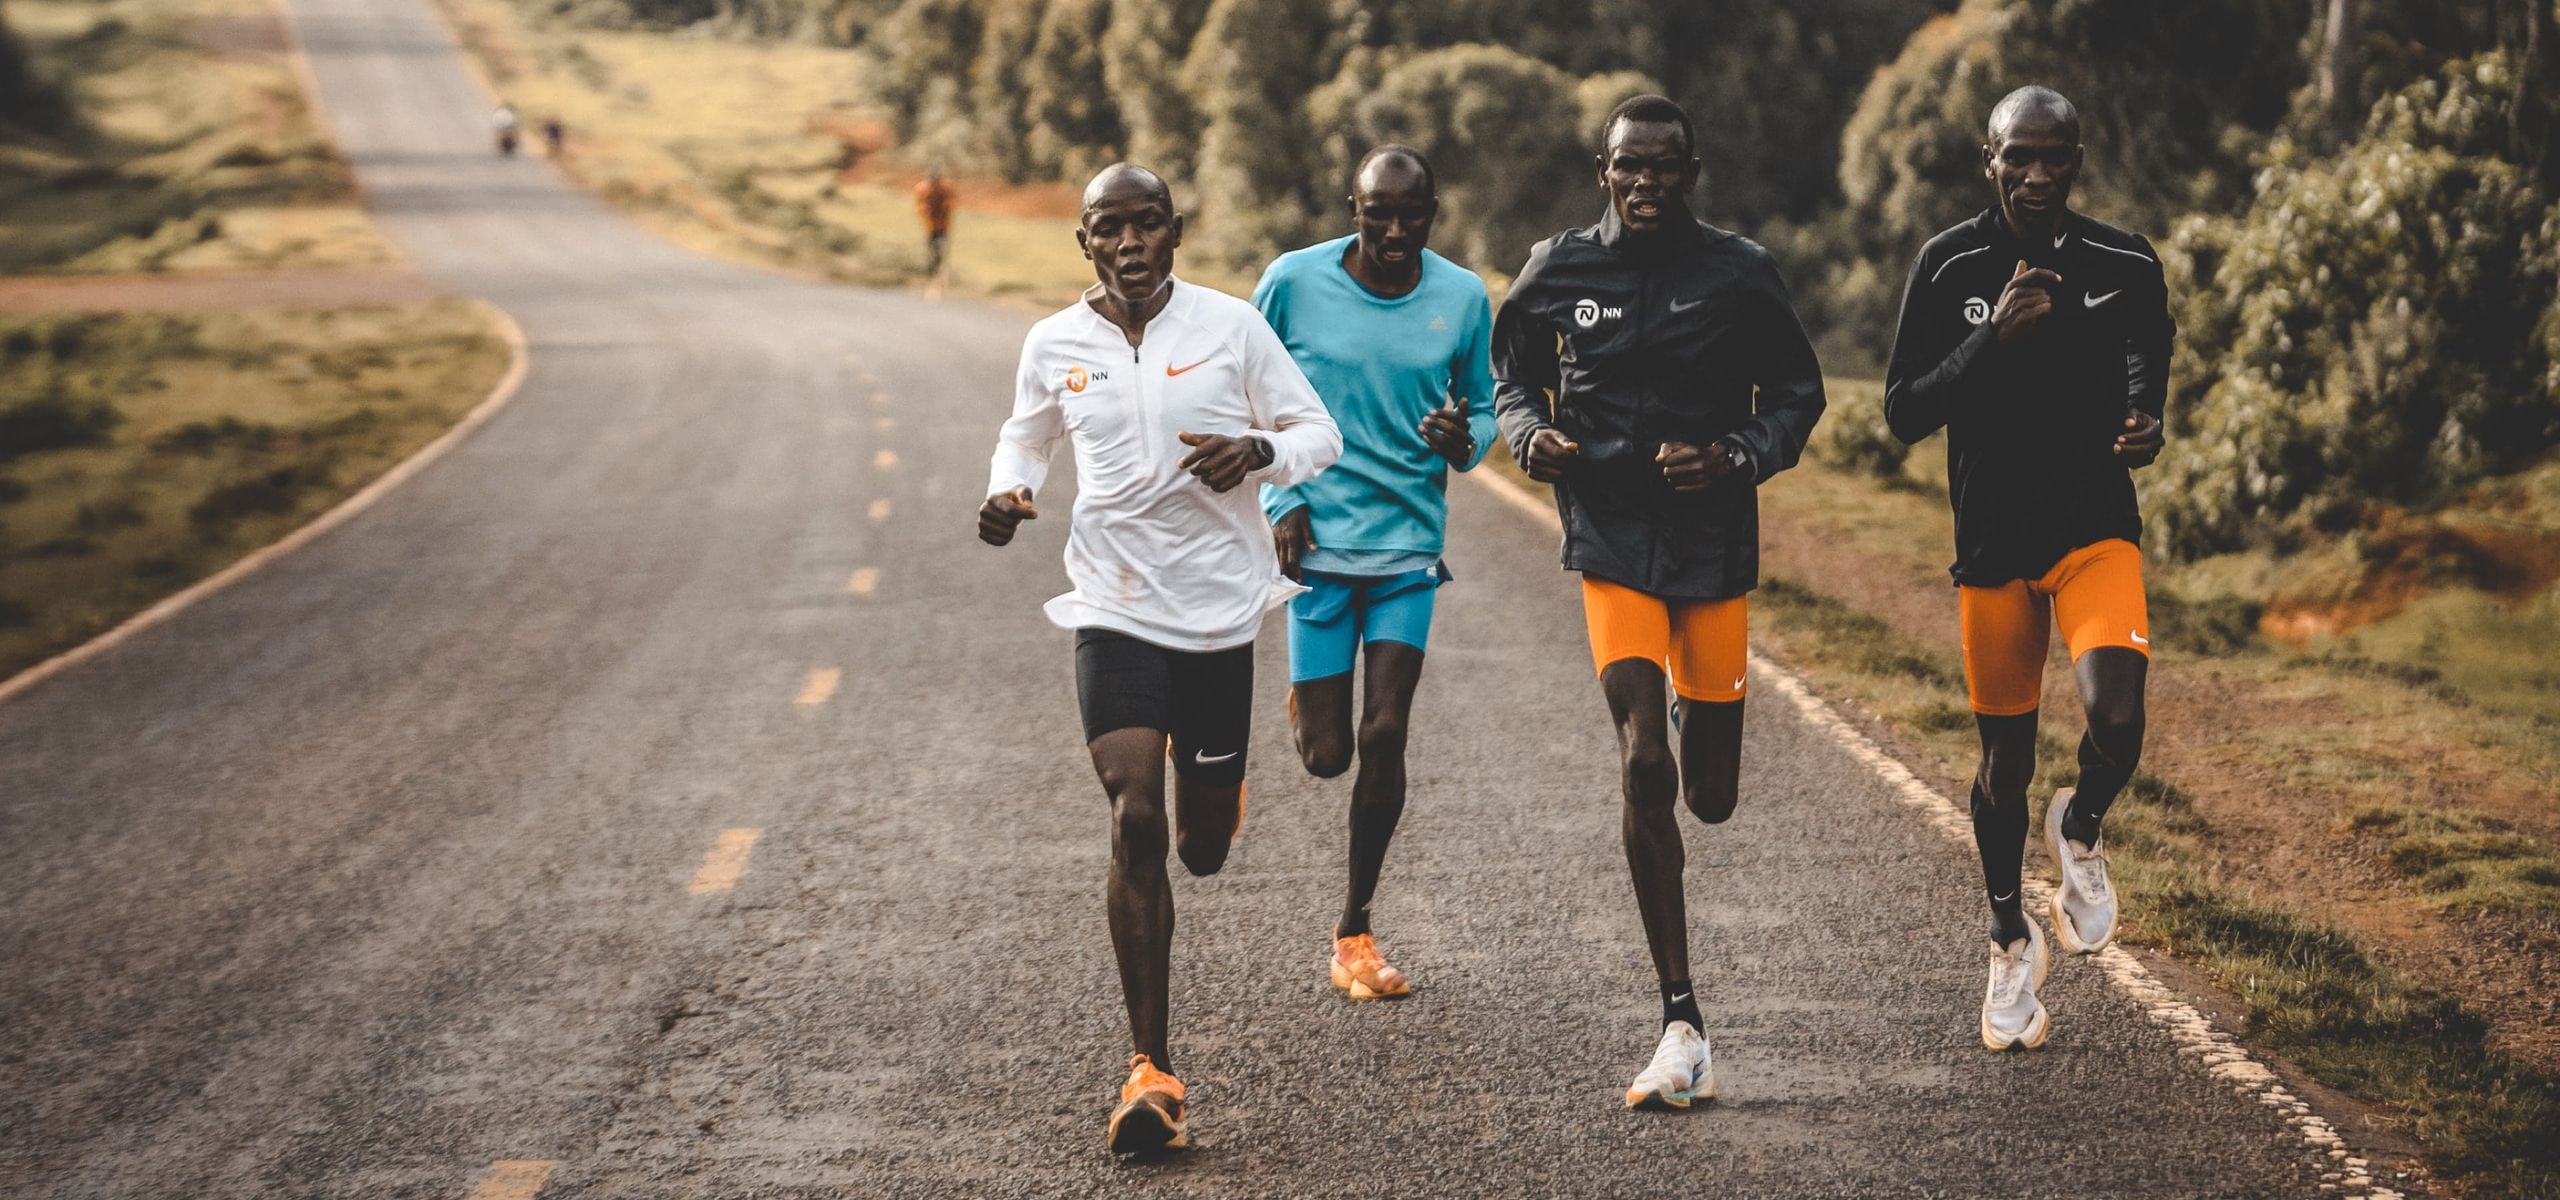 An image of Eliud Kipchoge and three other male runners training on a local road wearing COROS watches.